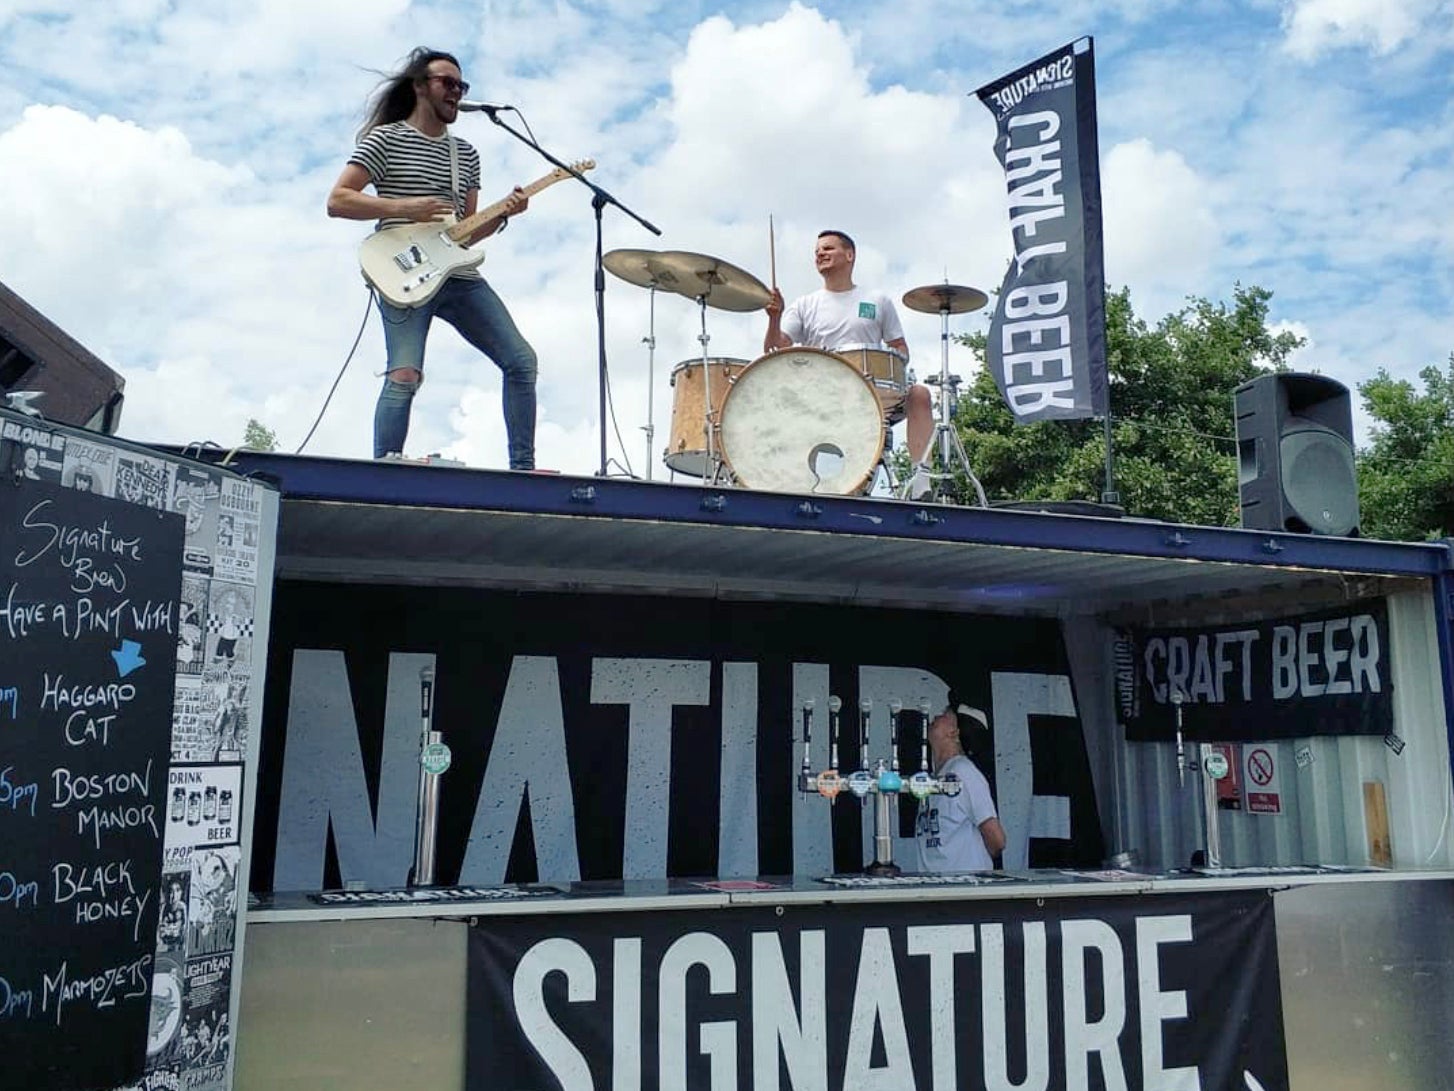 Signature Brew collaborates with bands in its mission to get craft beer into music venues: Haggard Cat play a gig atop its bar at 2000Trees festival